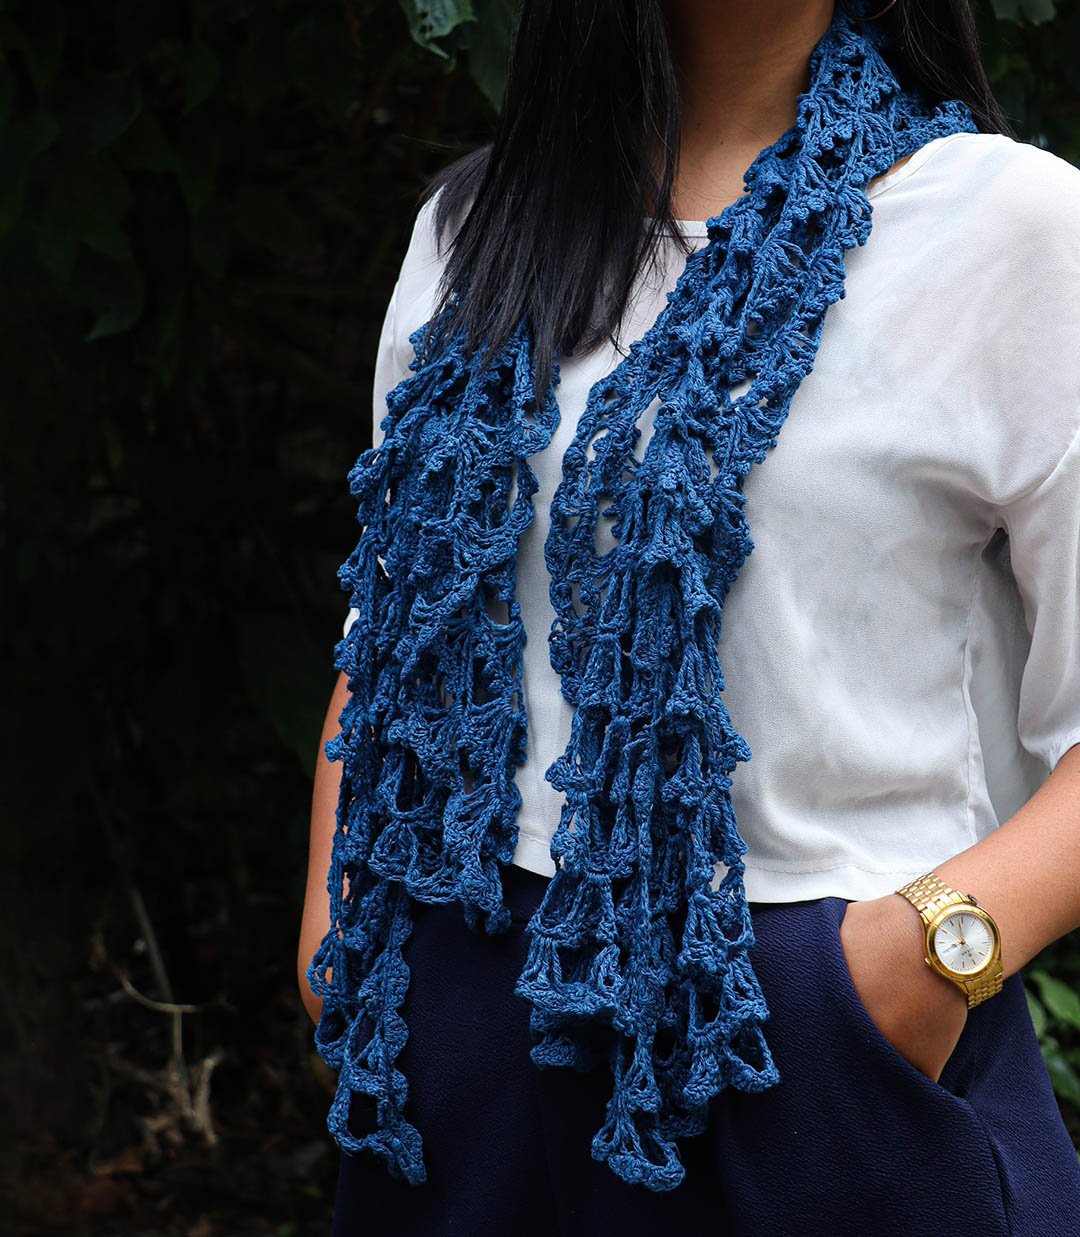 This is a Triangle Laces Shawl For Ladies - Download This Crochet Pattern Today